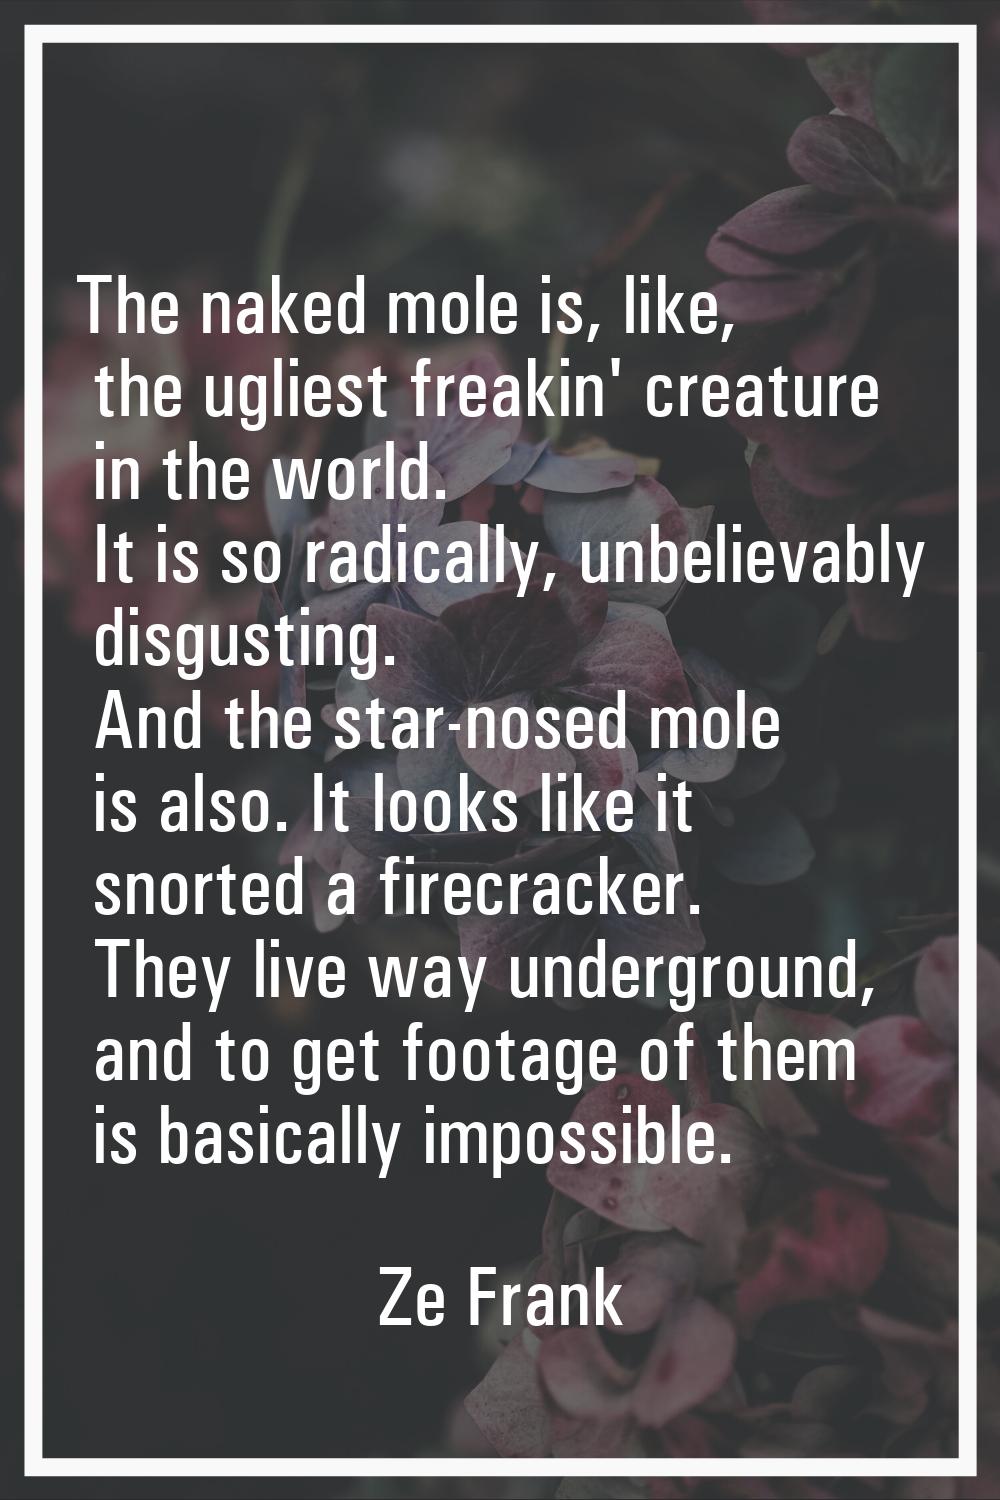 The naked mole is, like, the ugliest freakin' creature in the world. It is so radically, unbelievab